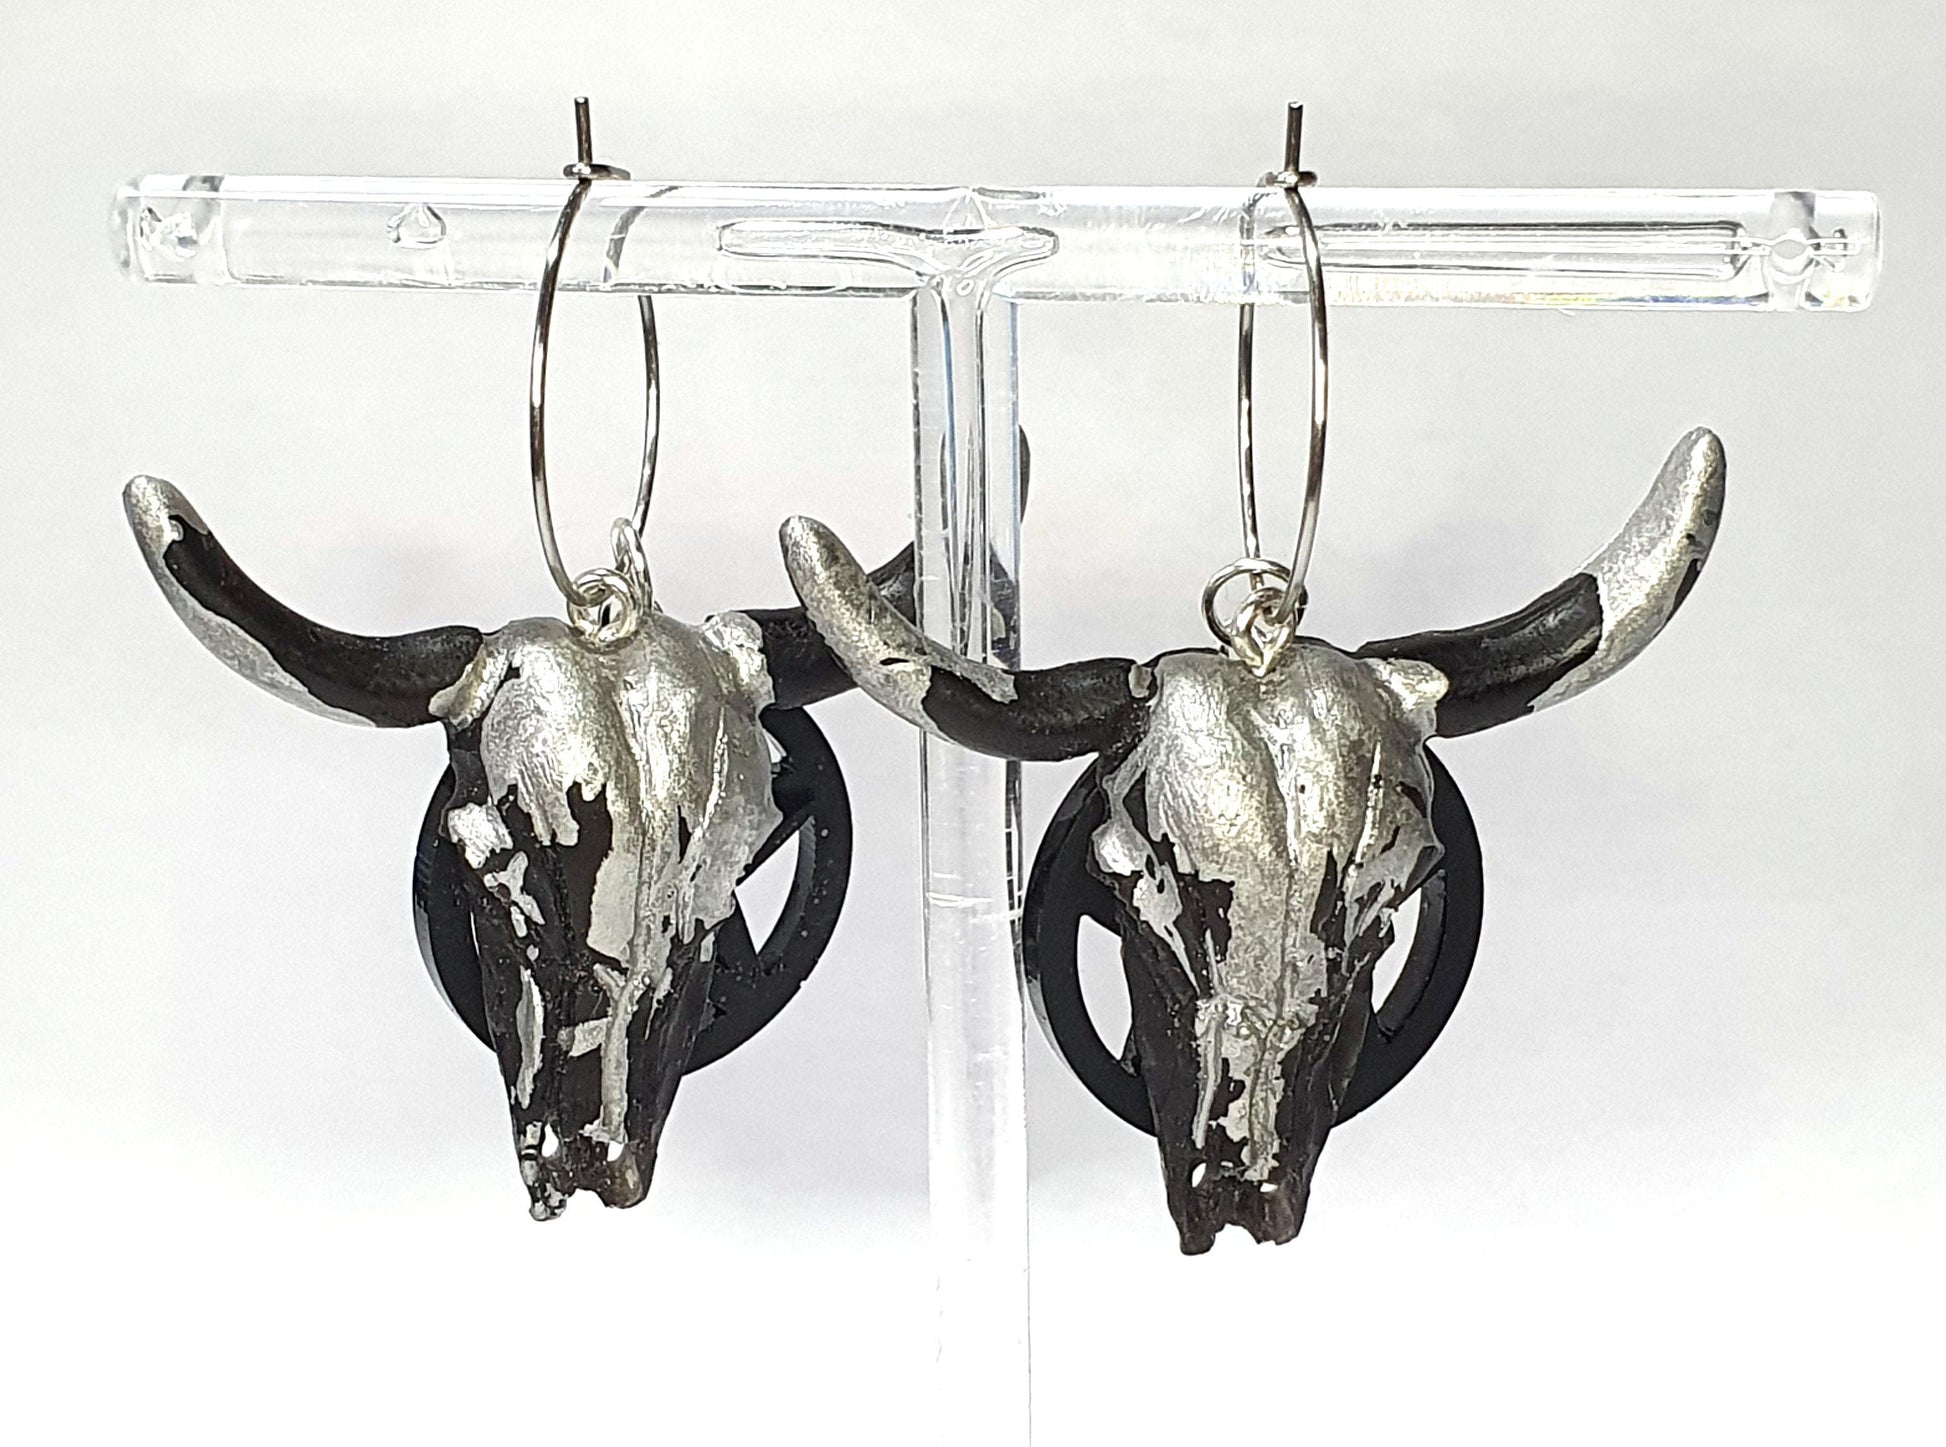 Black and Silver Skull Earrings With Black Pentagrams - The Cerulean Wolf